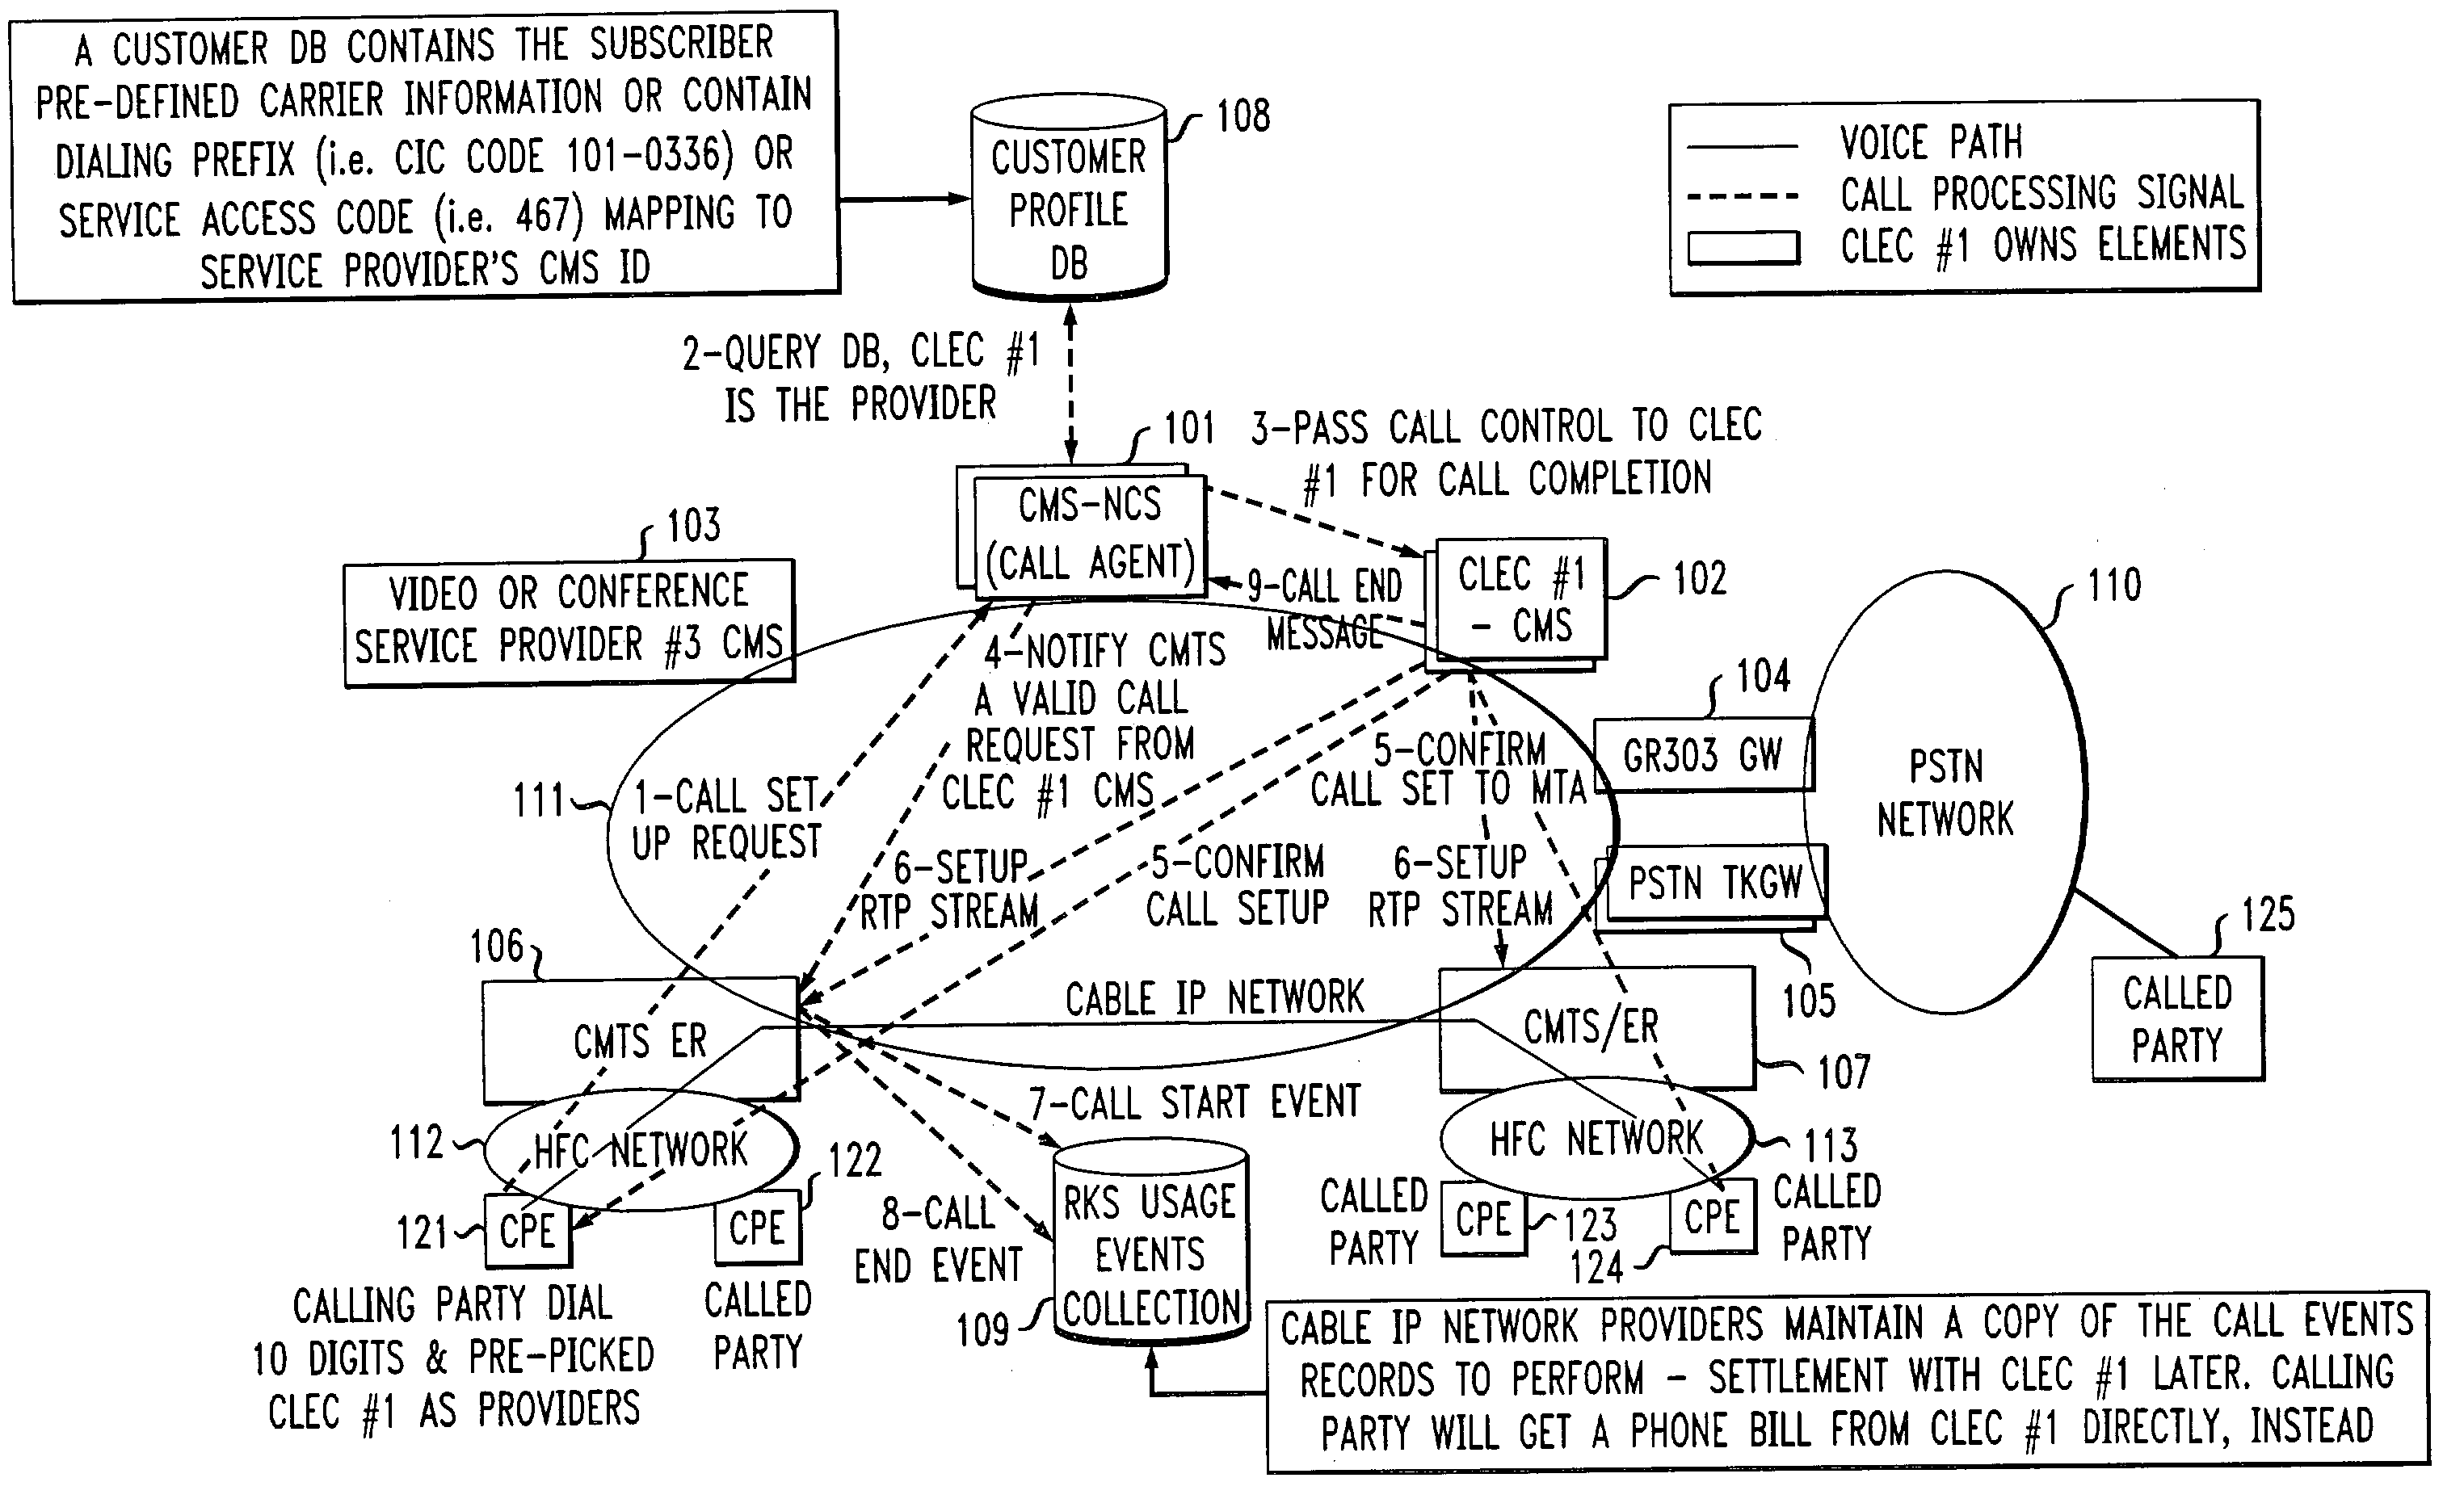 Method and apparatus for handing off control of service access over a cable IP network